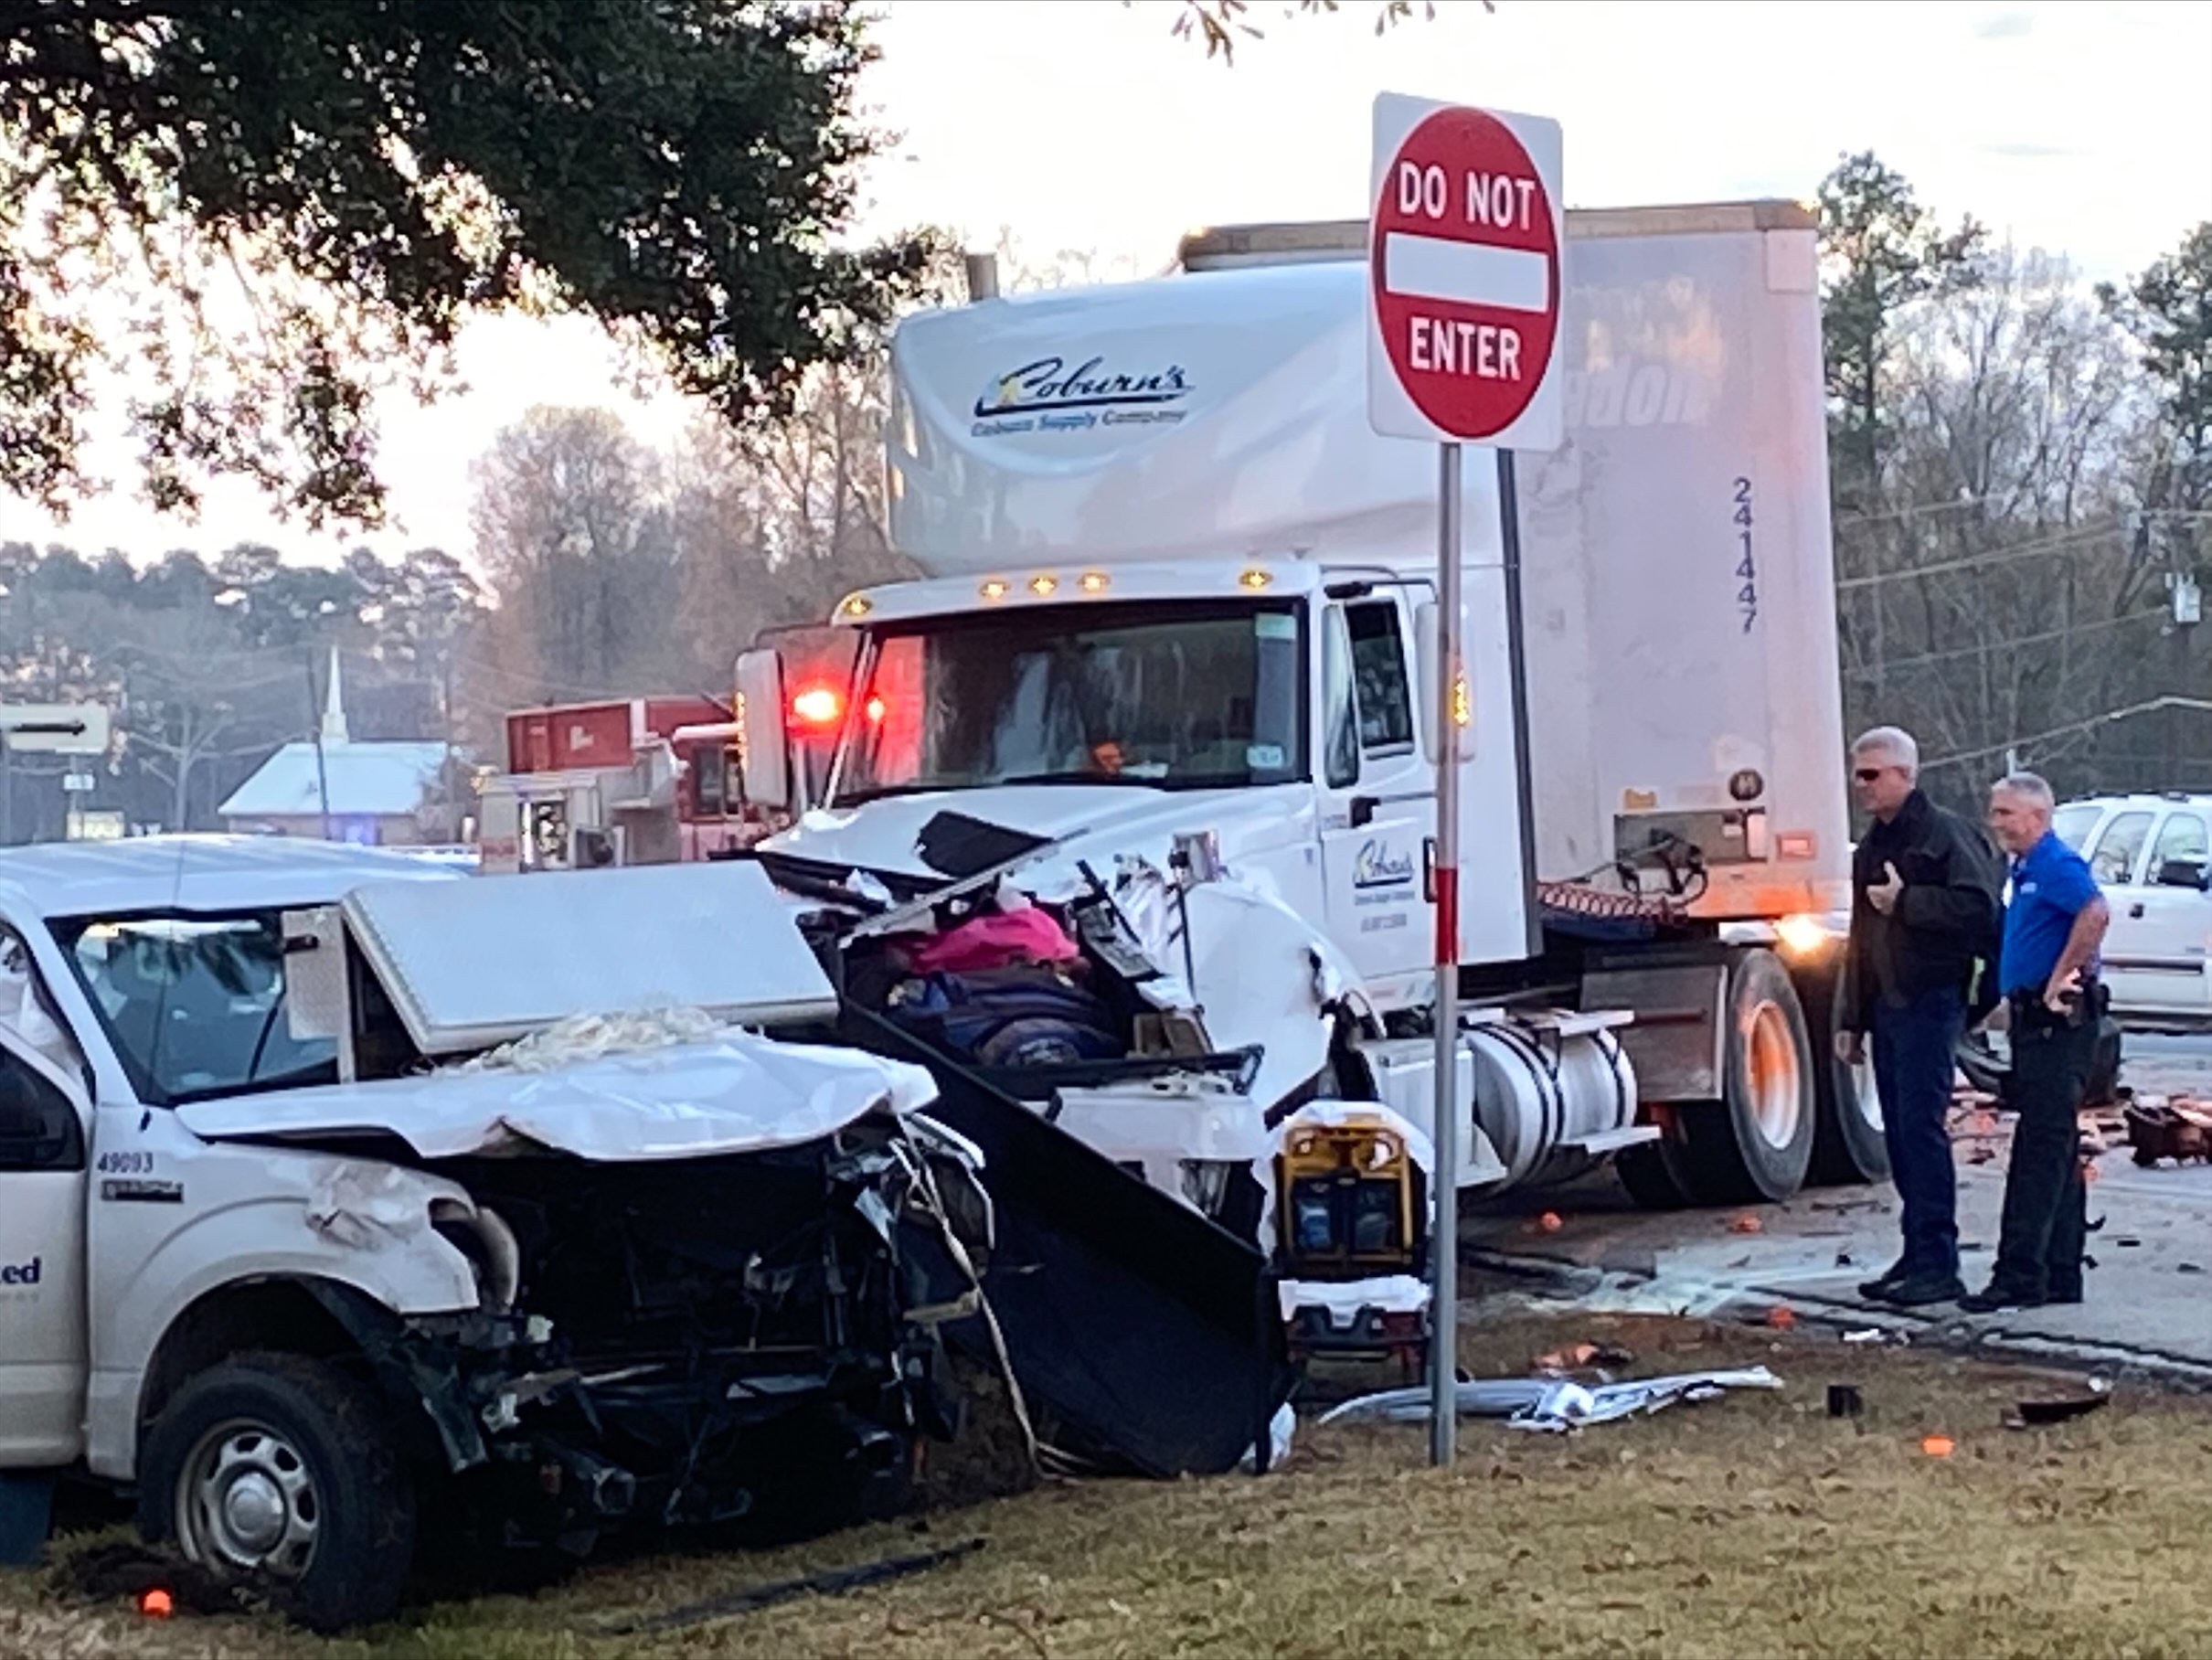 7 killed in head-on crash involving suspected migrant-smuggling vehicle:  Texas DPS - ABC News